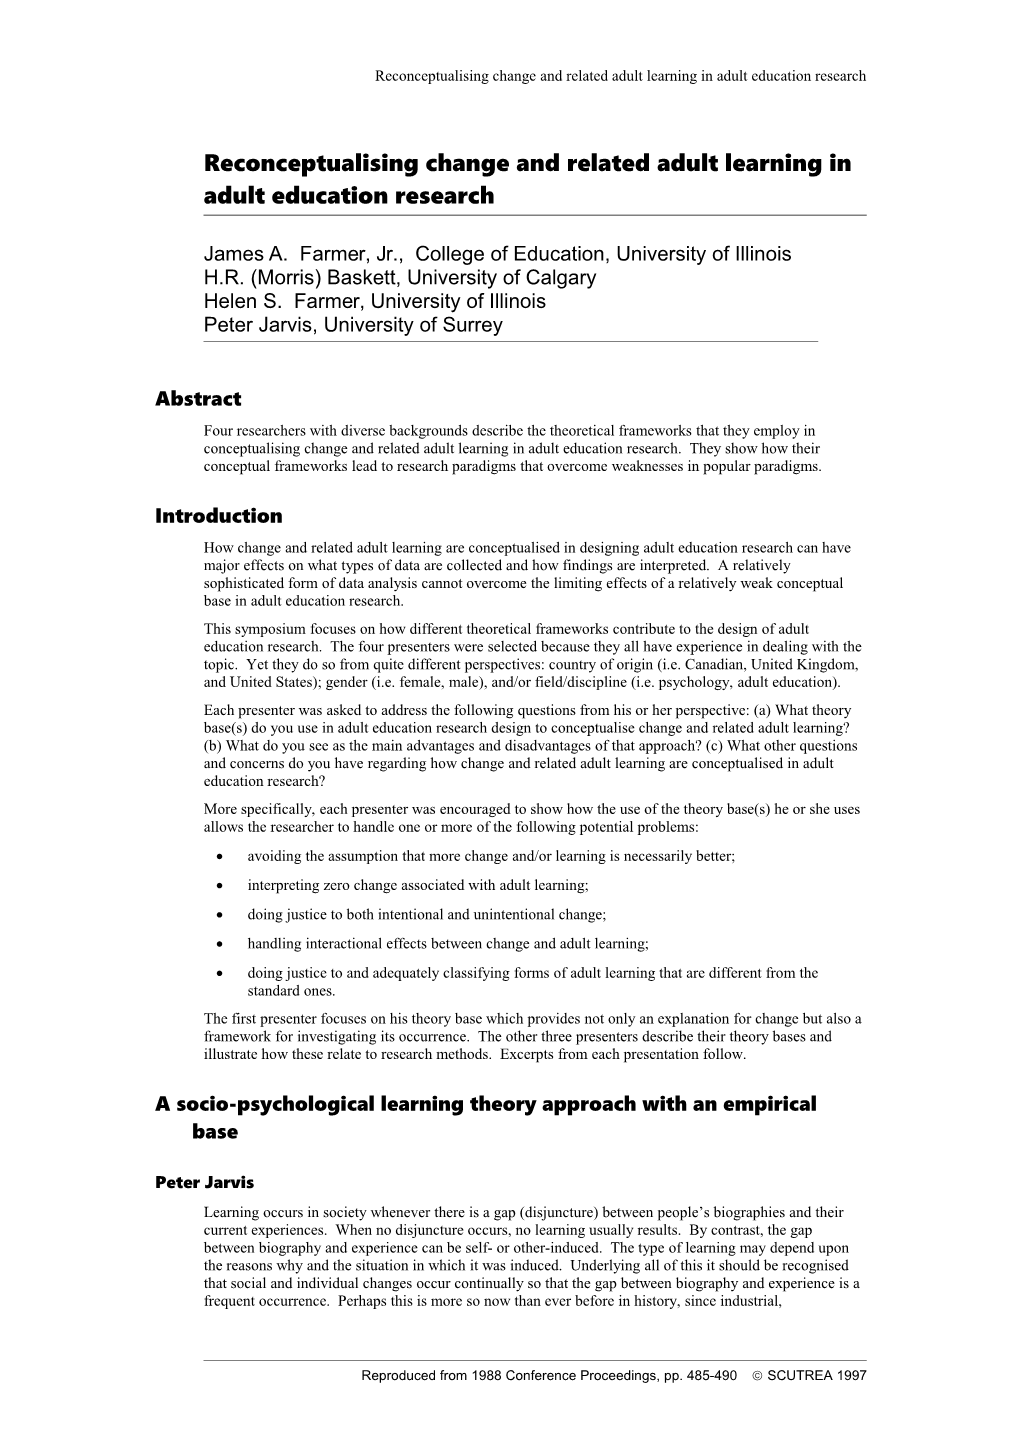 Reconceptualising Change and Related Adult Learning in Adult Education Research